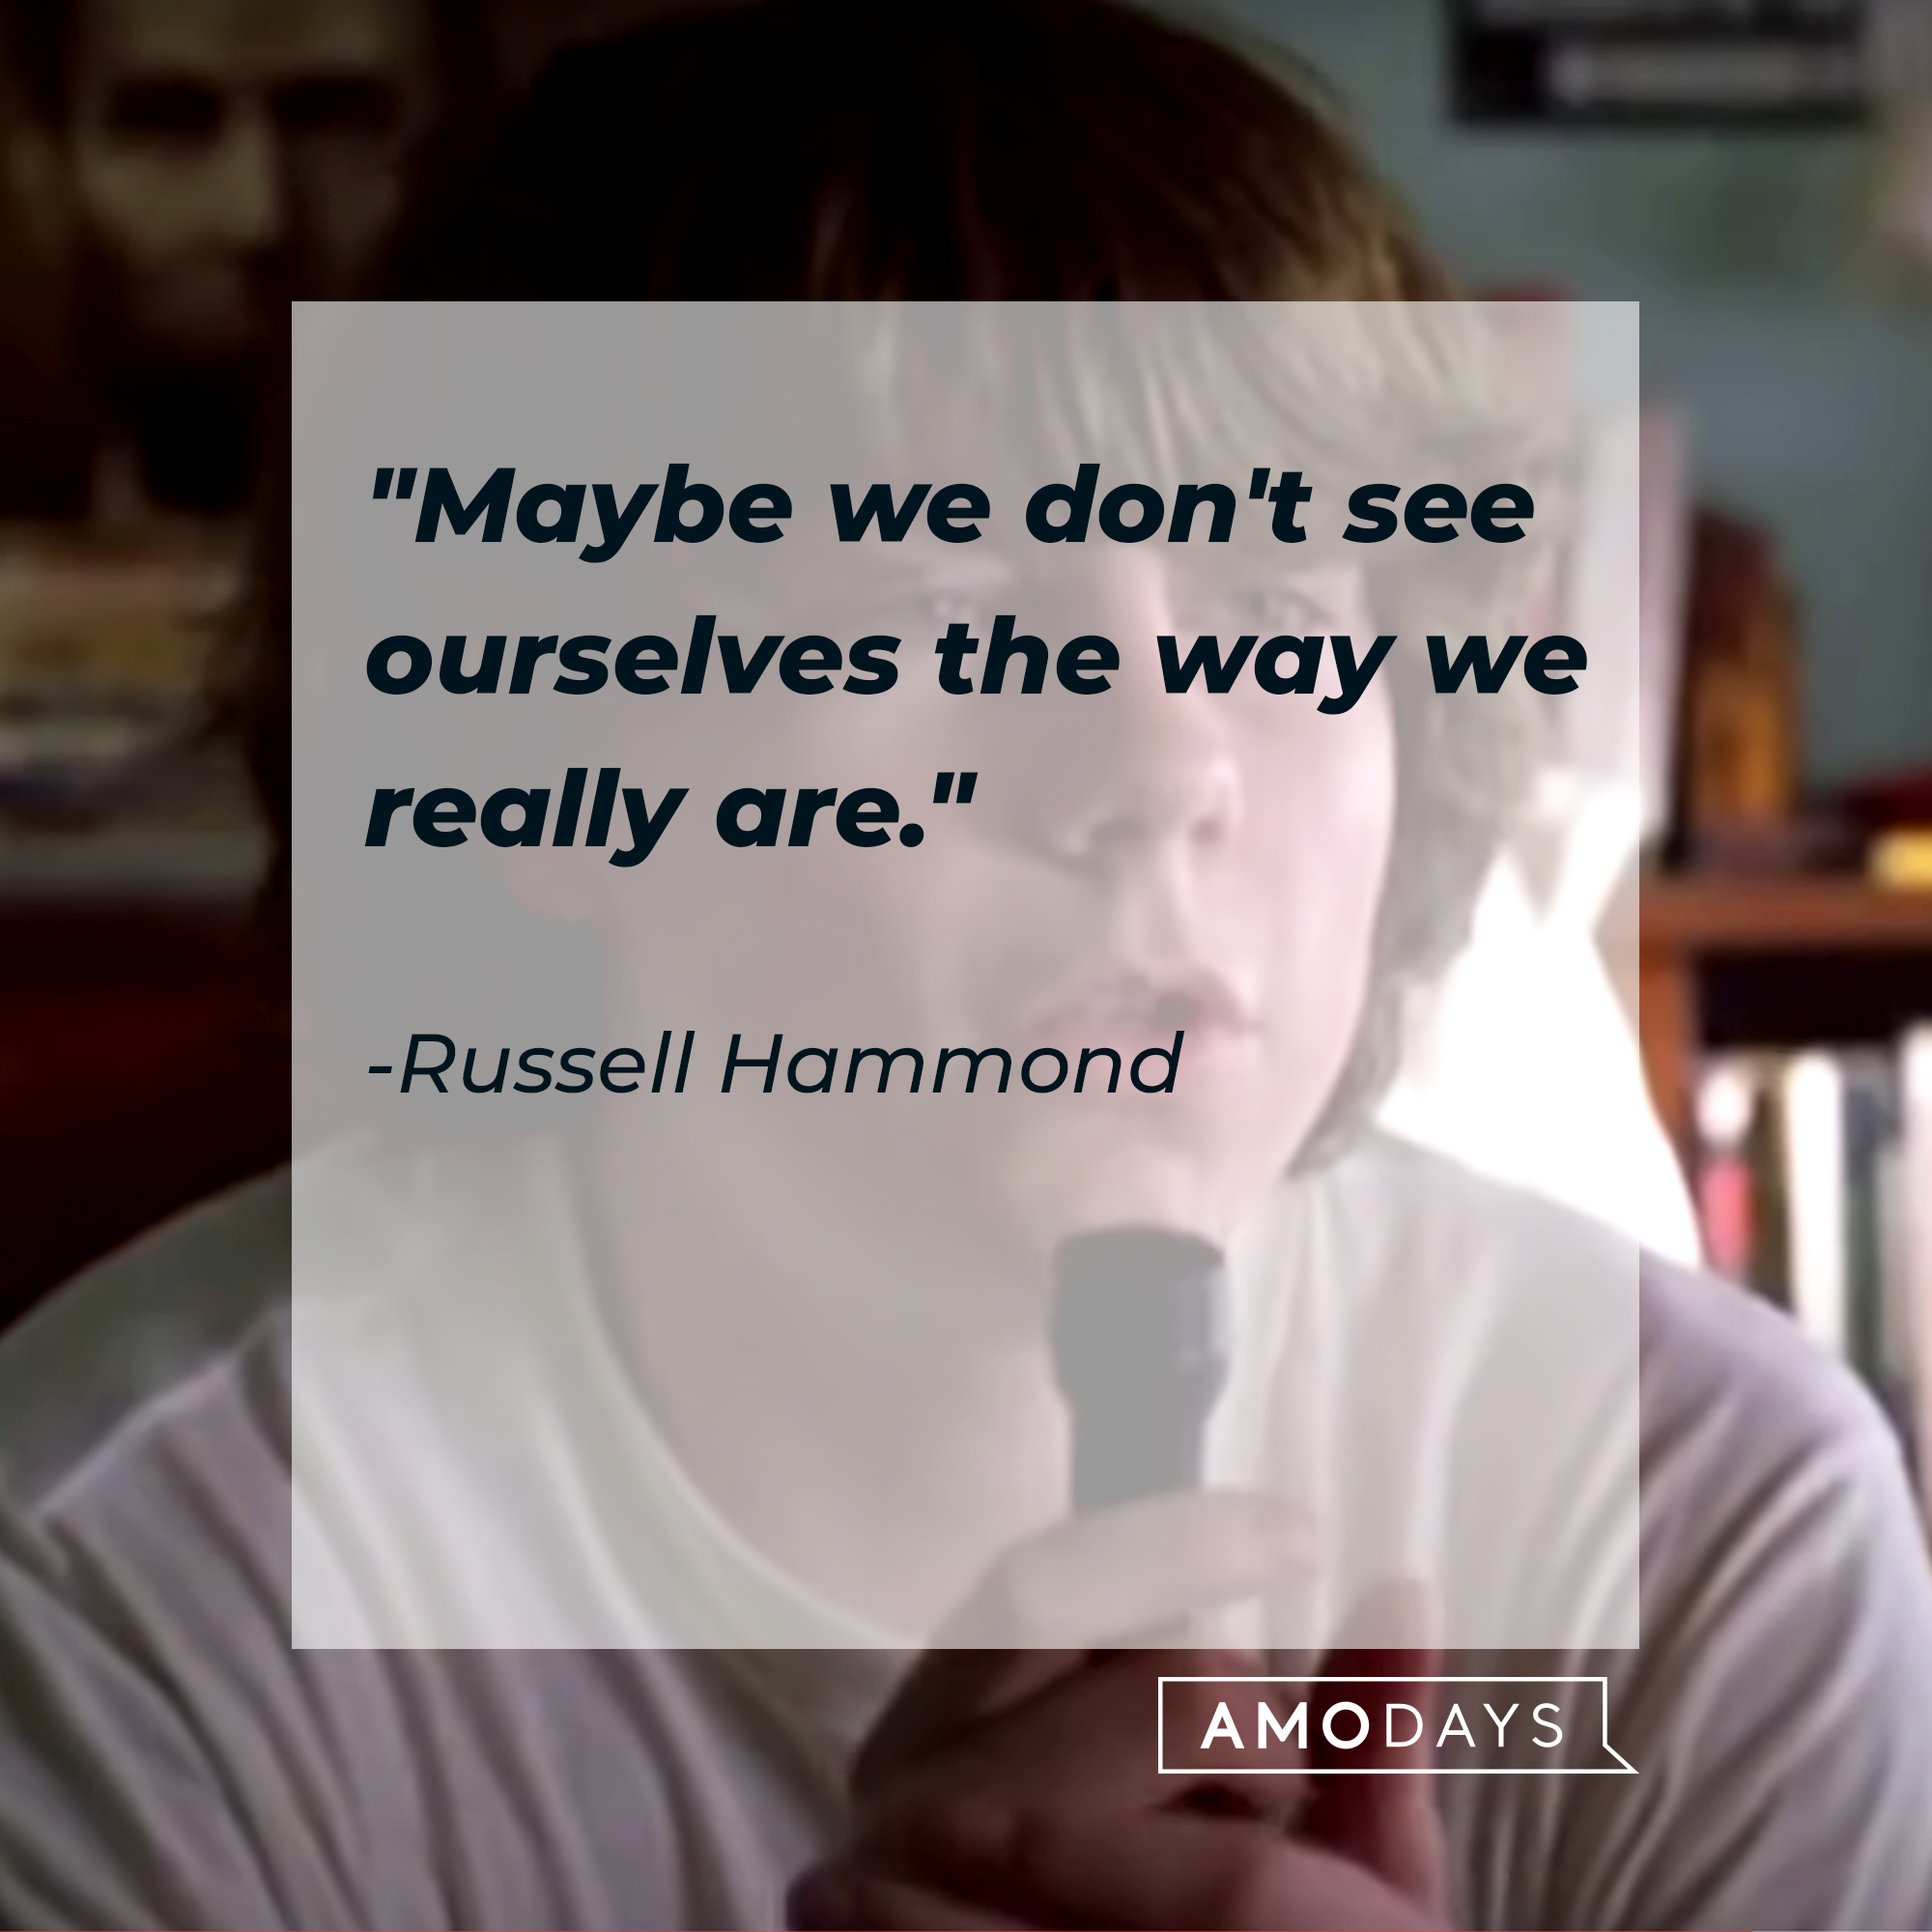 Russell Hammond's quote: "Maybe we don't see ourselves the way we really are." | Source: Facebook/AlmostFamousTheMovie